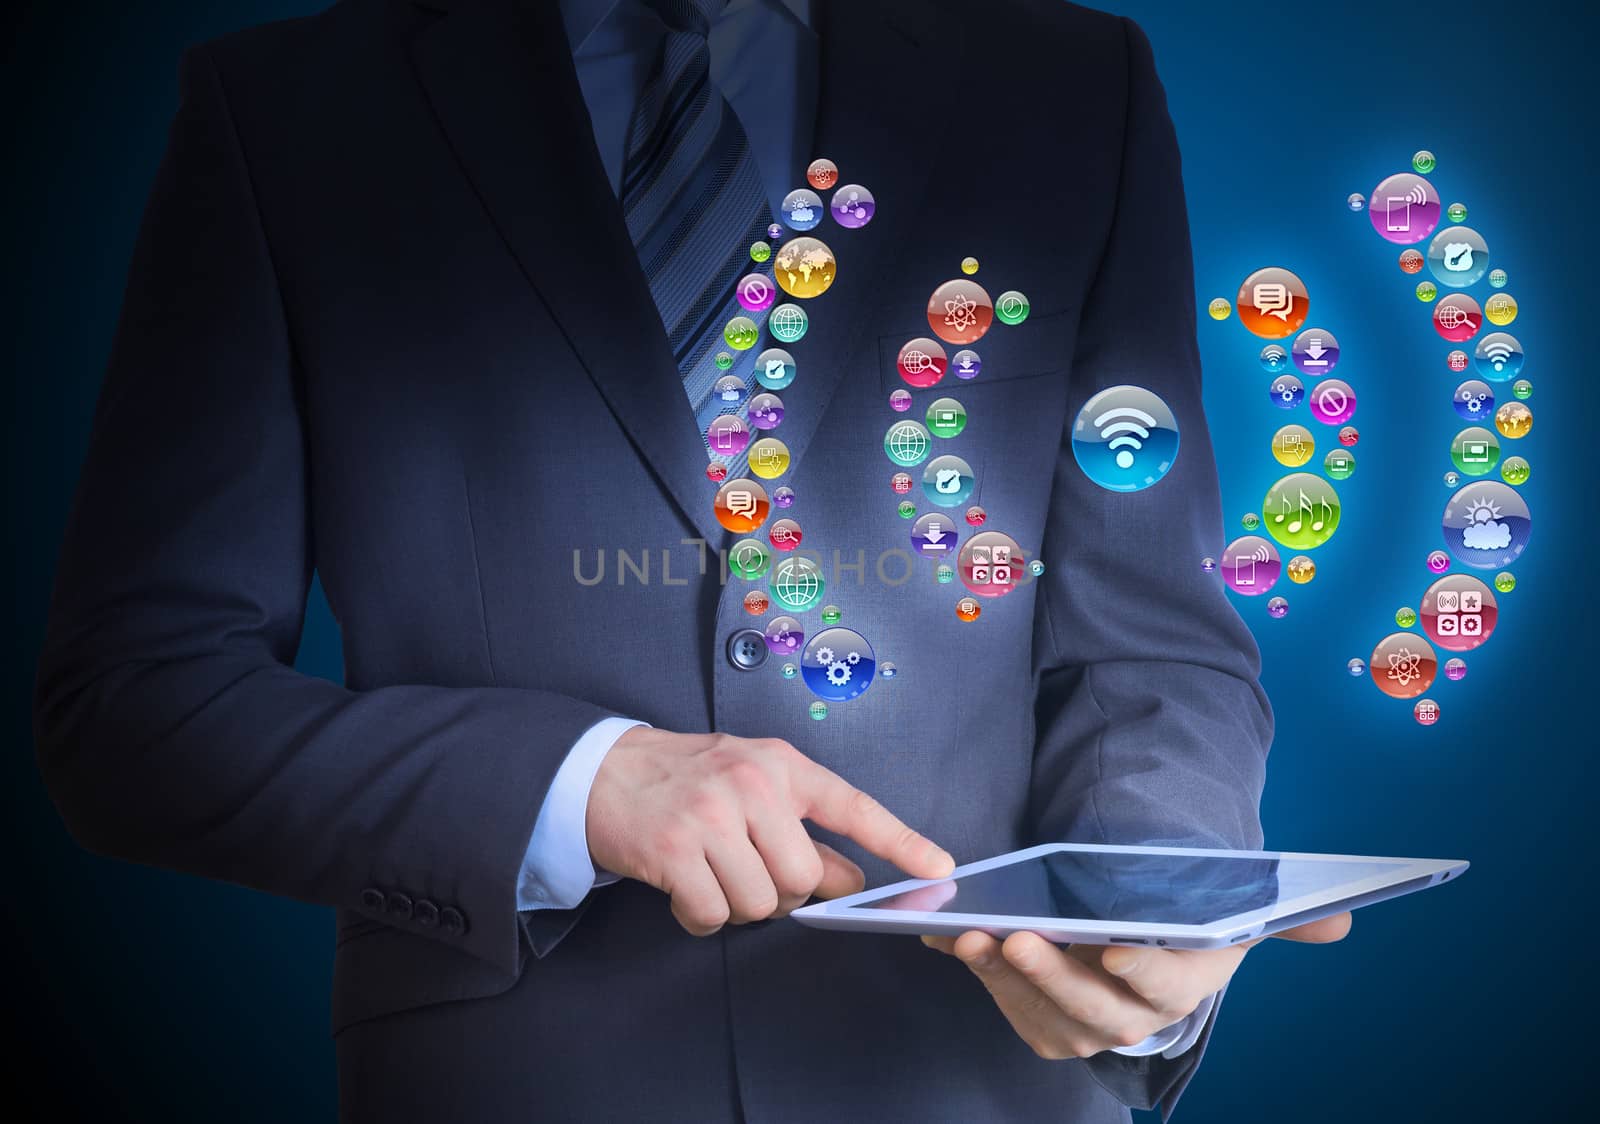 Businessman in a suit holding a tablet in his hands. Above the screen tablet application icons in the form of wi-fi icon